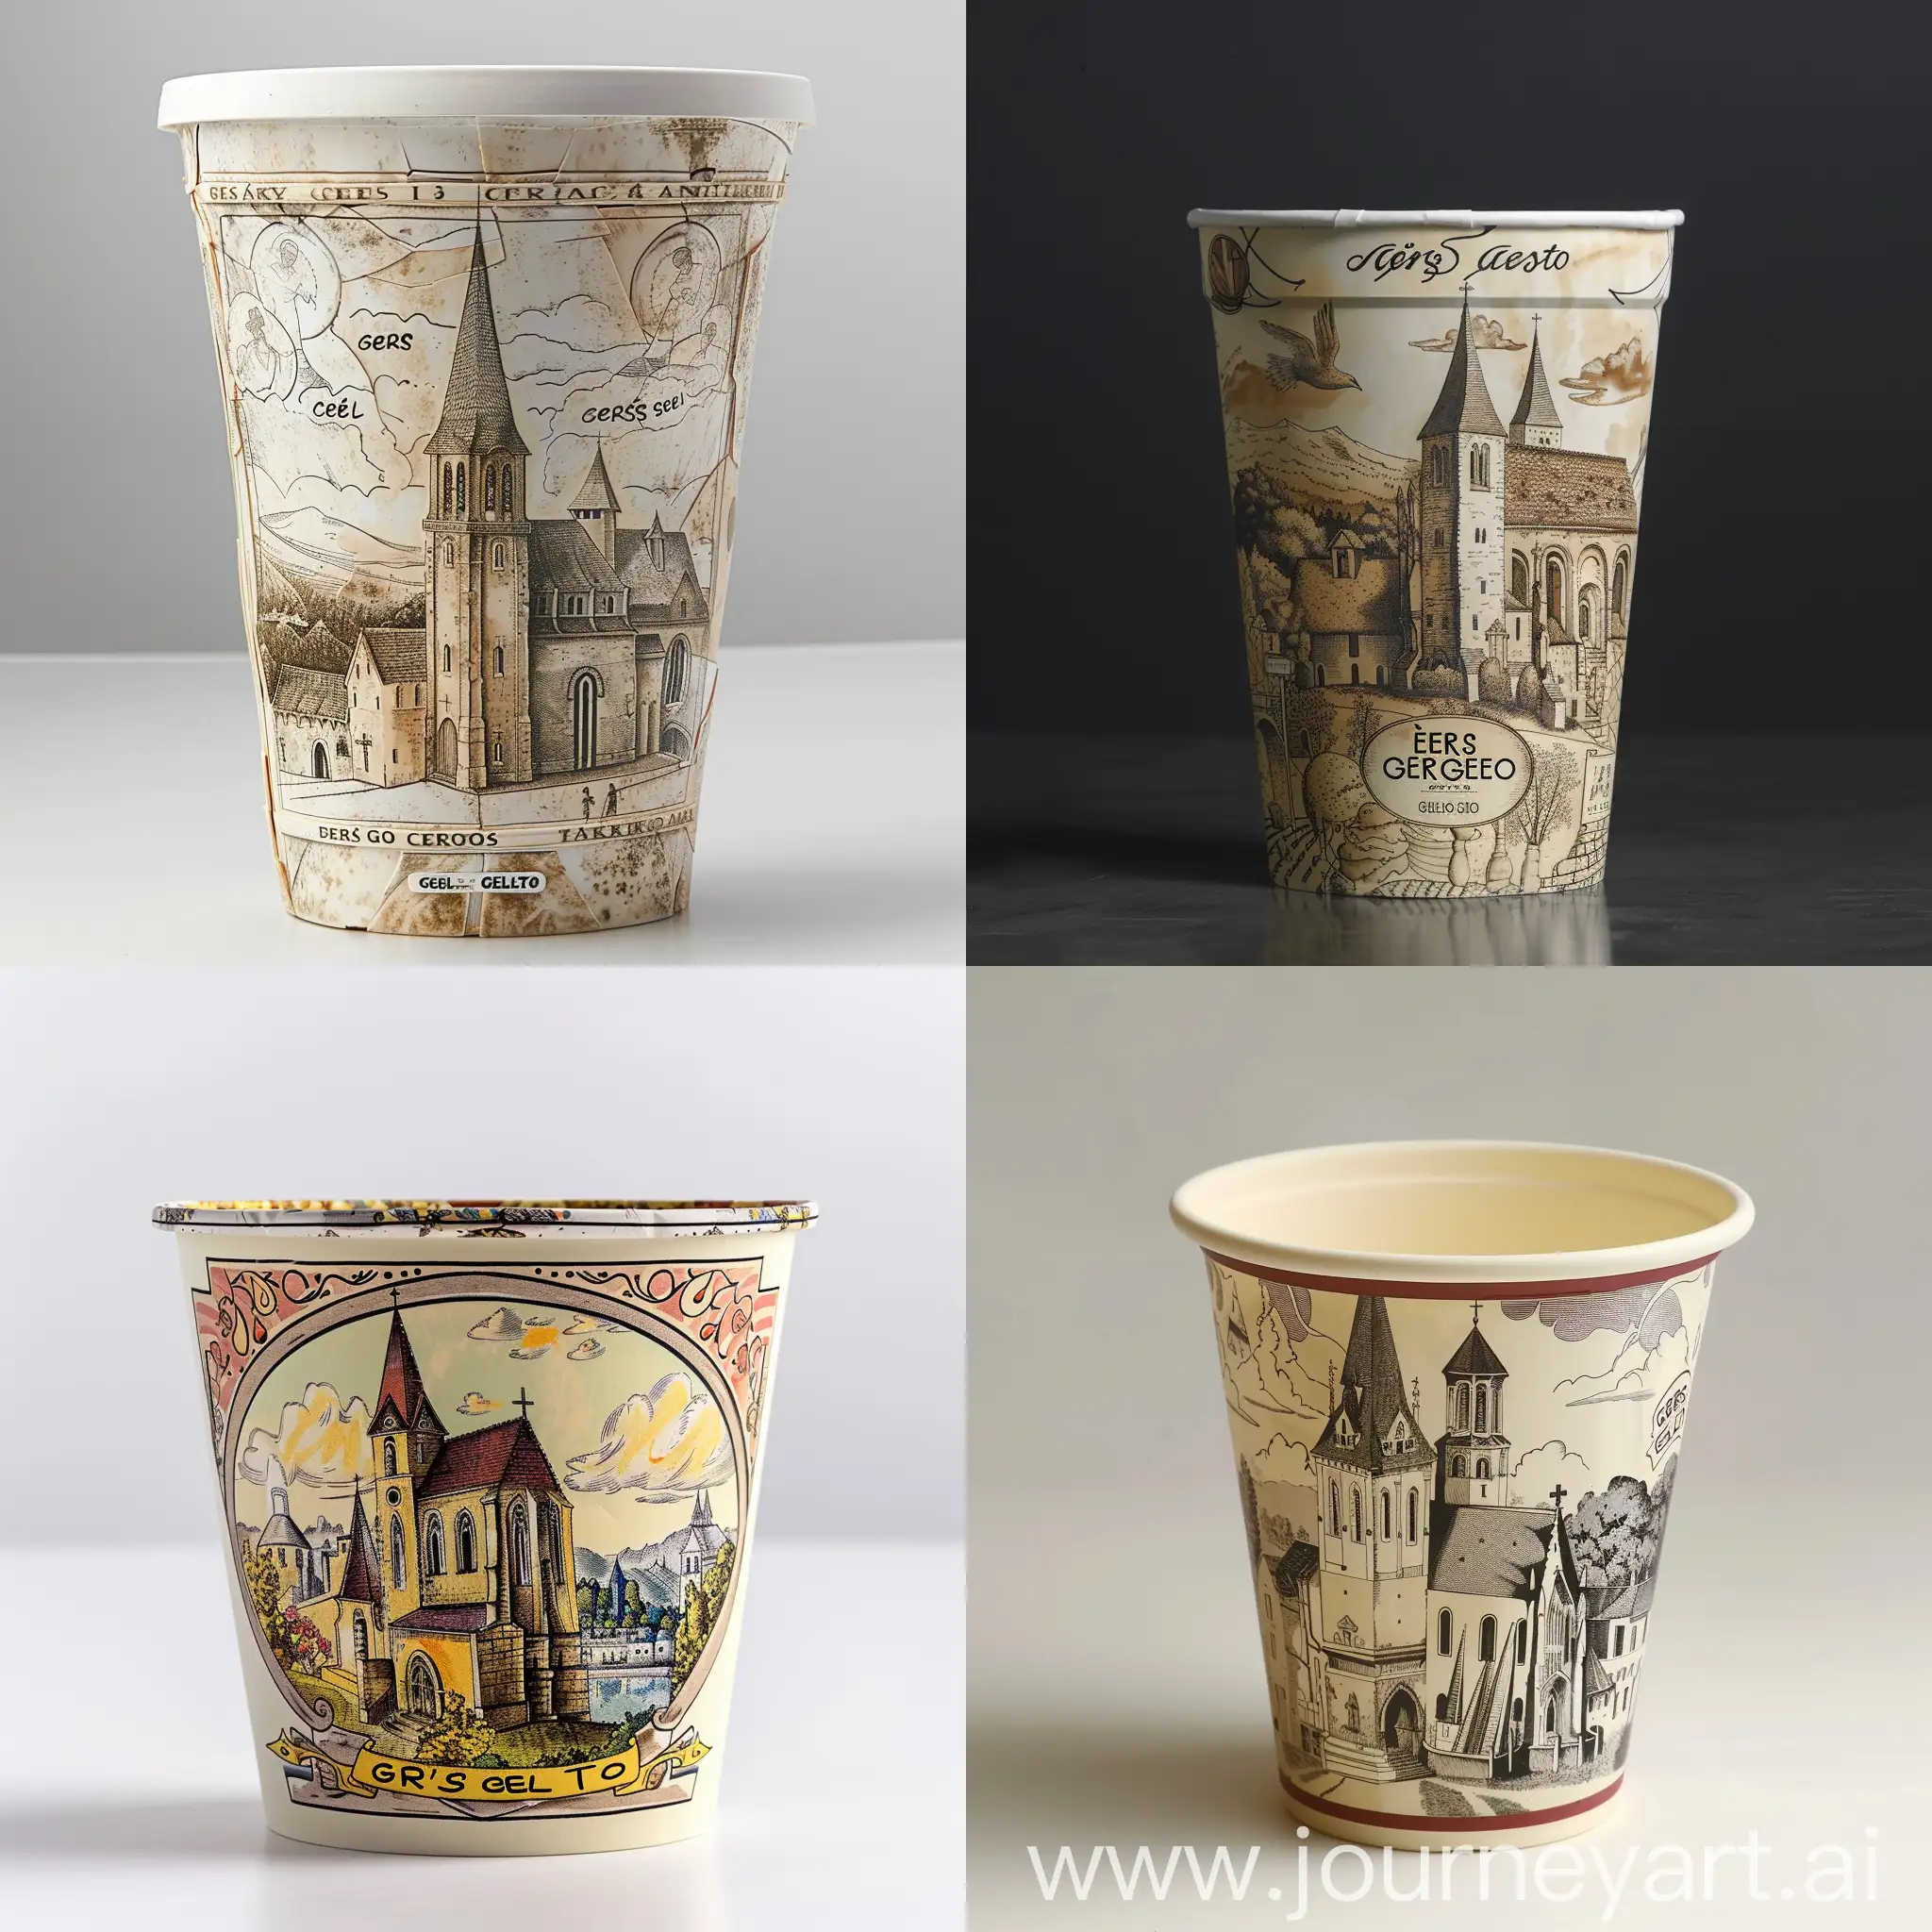 design for take-away ice cream tub, recycled materials, image of 13th century French church on tub, name of ice cream is Gers Gelato